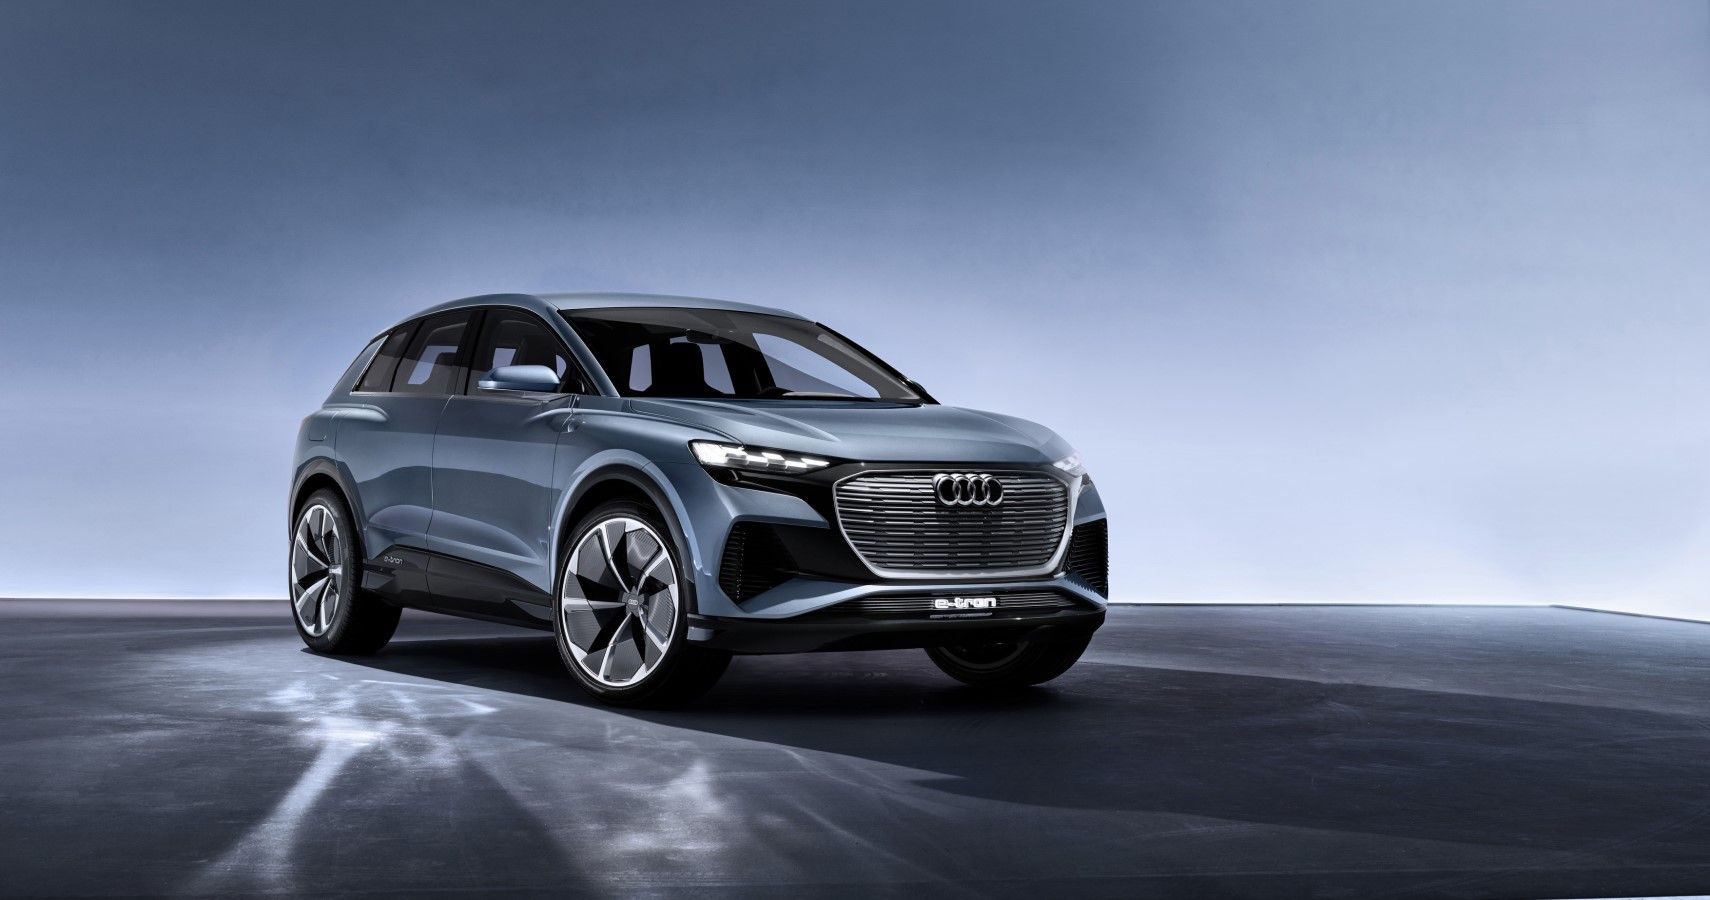 2021 Audi Q4 E-Tron: Here's What We're Expecting